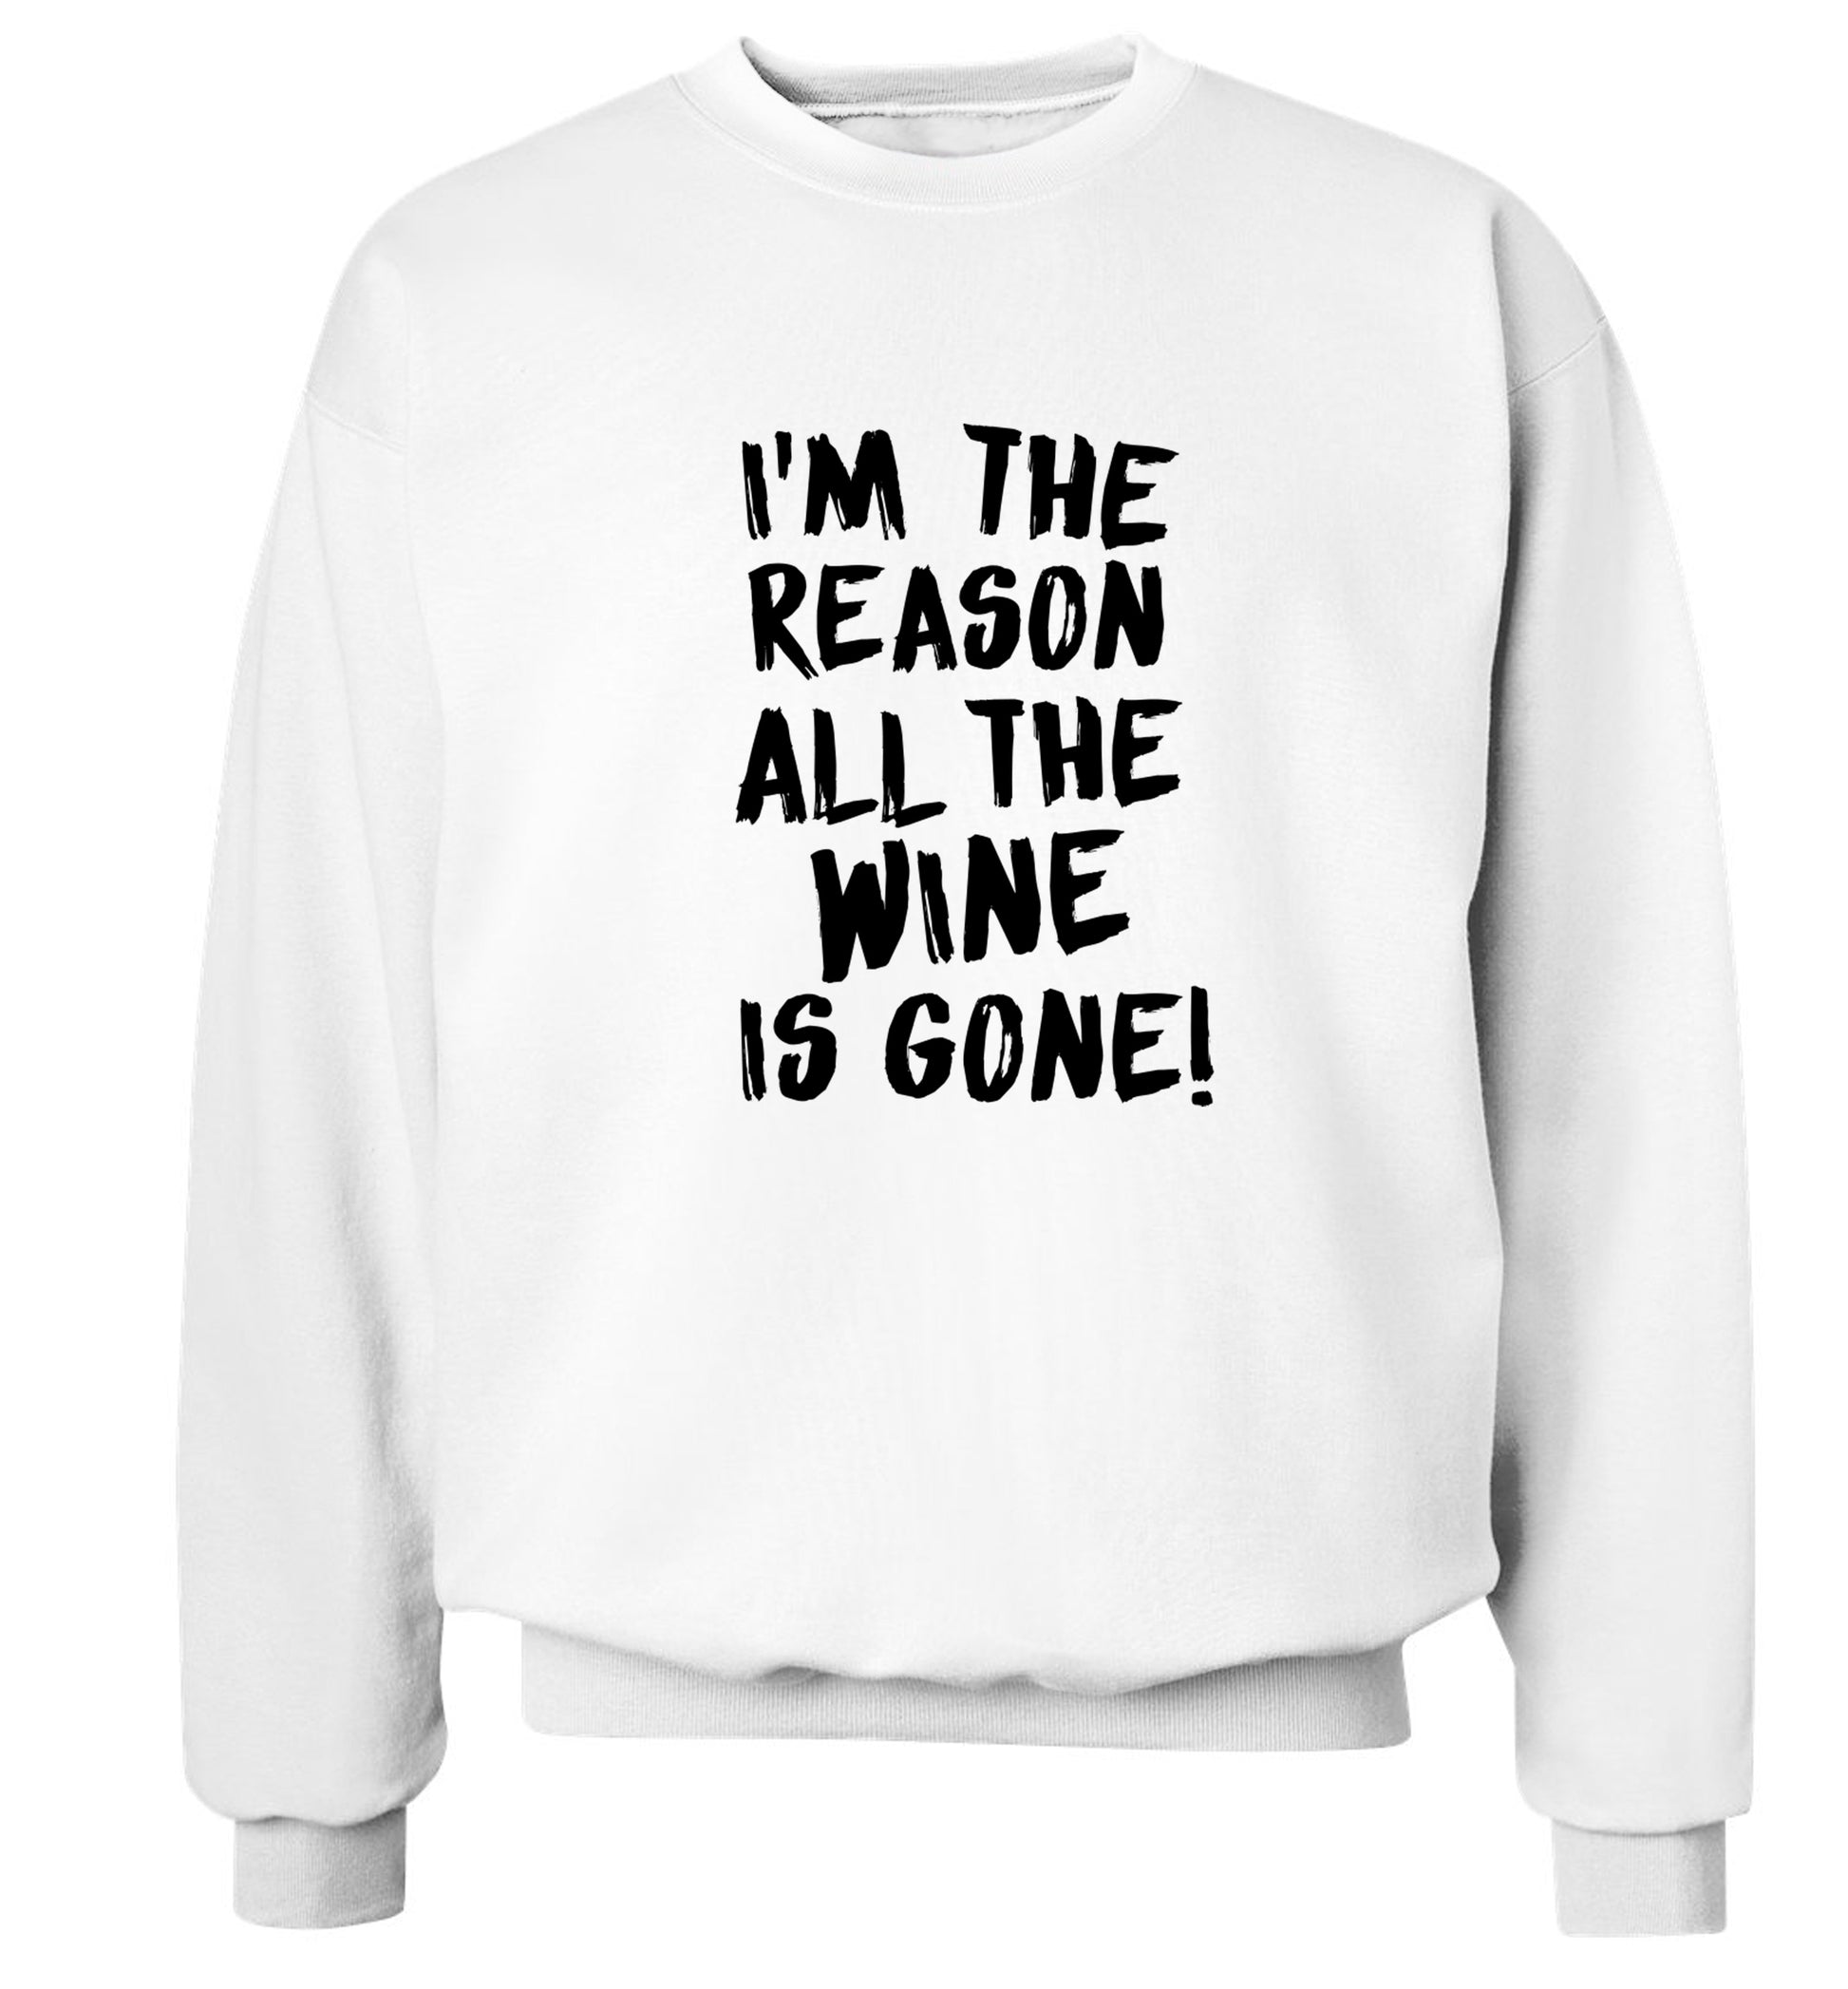 I'm the reason all the wine is gone Adult's unisex white Sweater 2XL